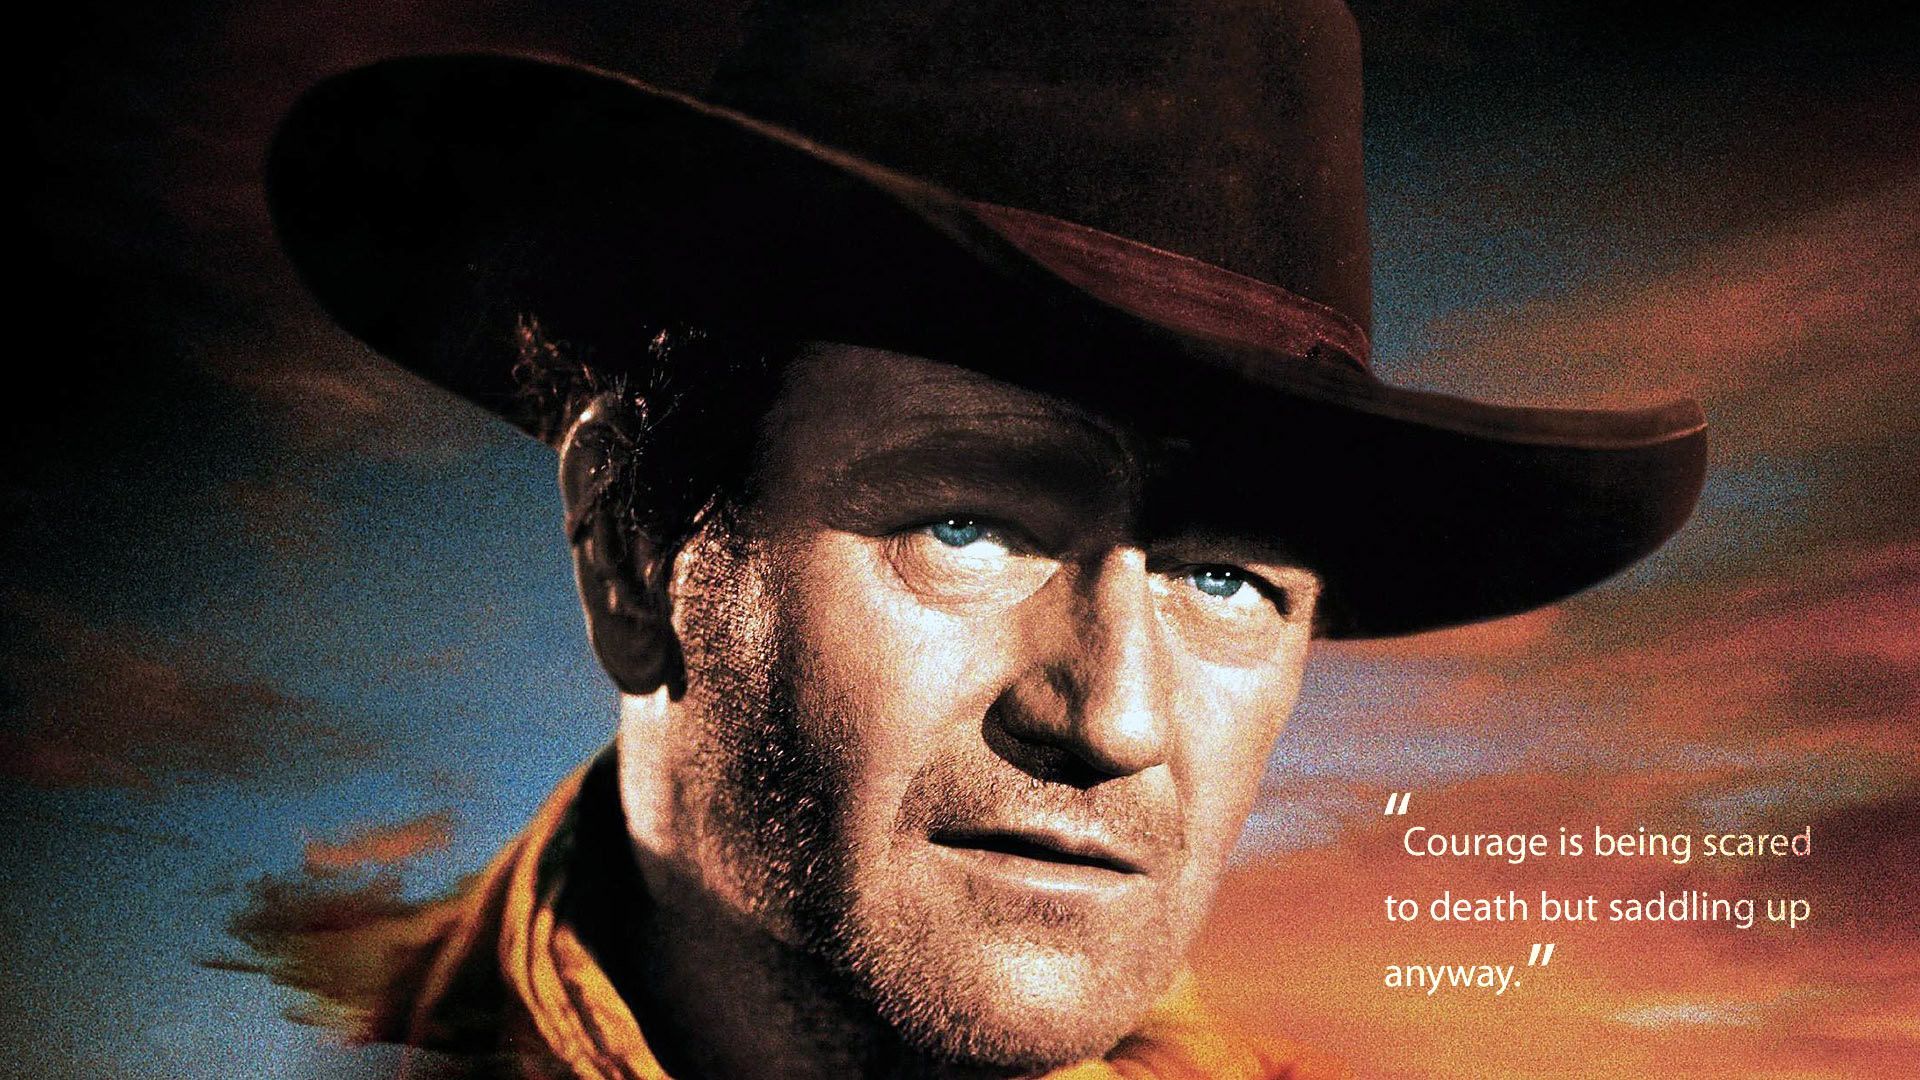 John Wayne Courage Quote HD Wallpaper FullHDWpp HD Wallpaper 1920x1080. John wayne western movies, John wayne, Clint eastwood movies